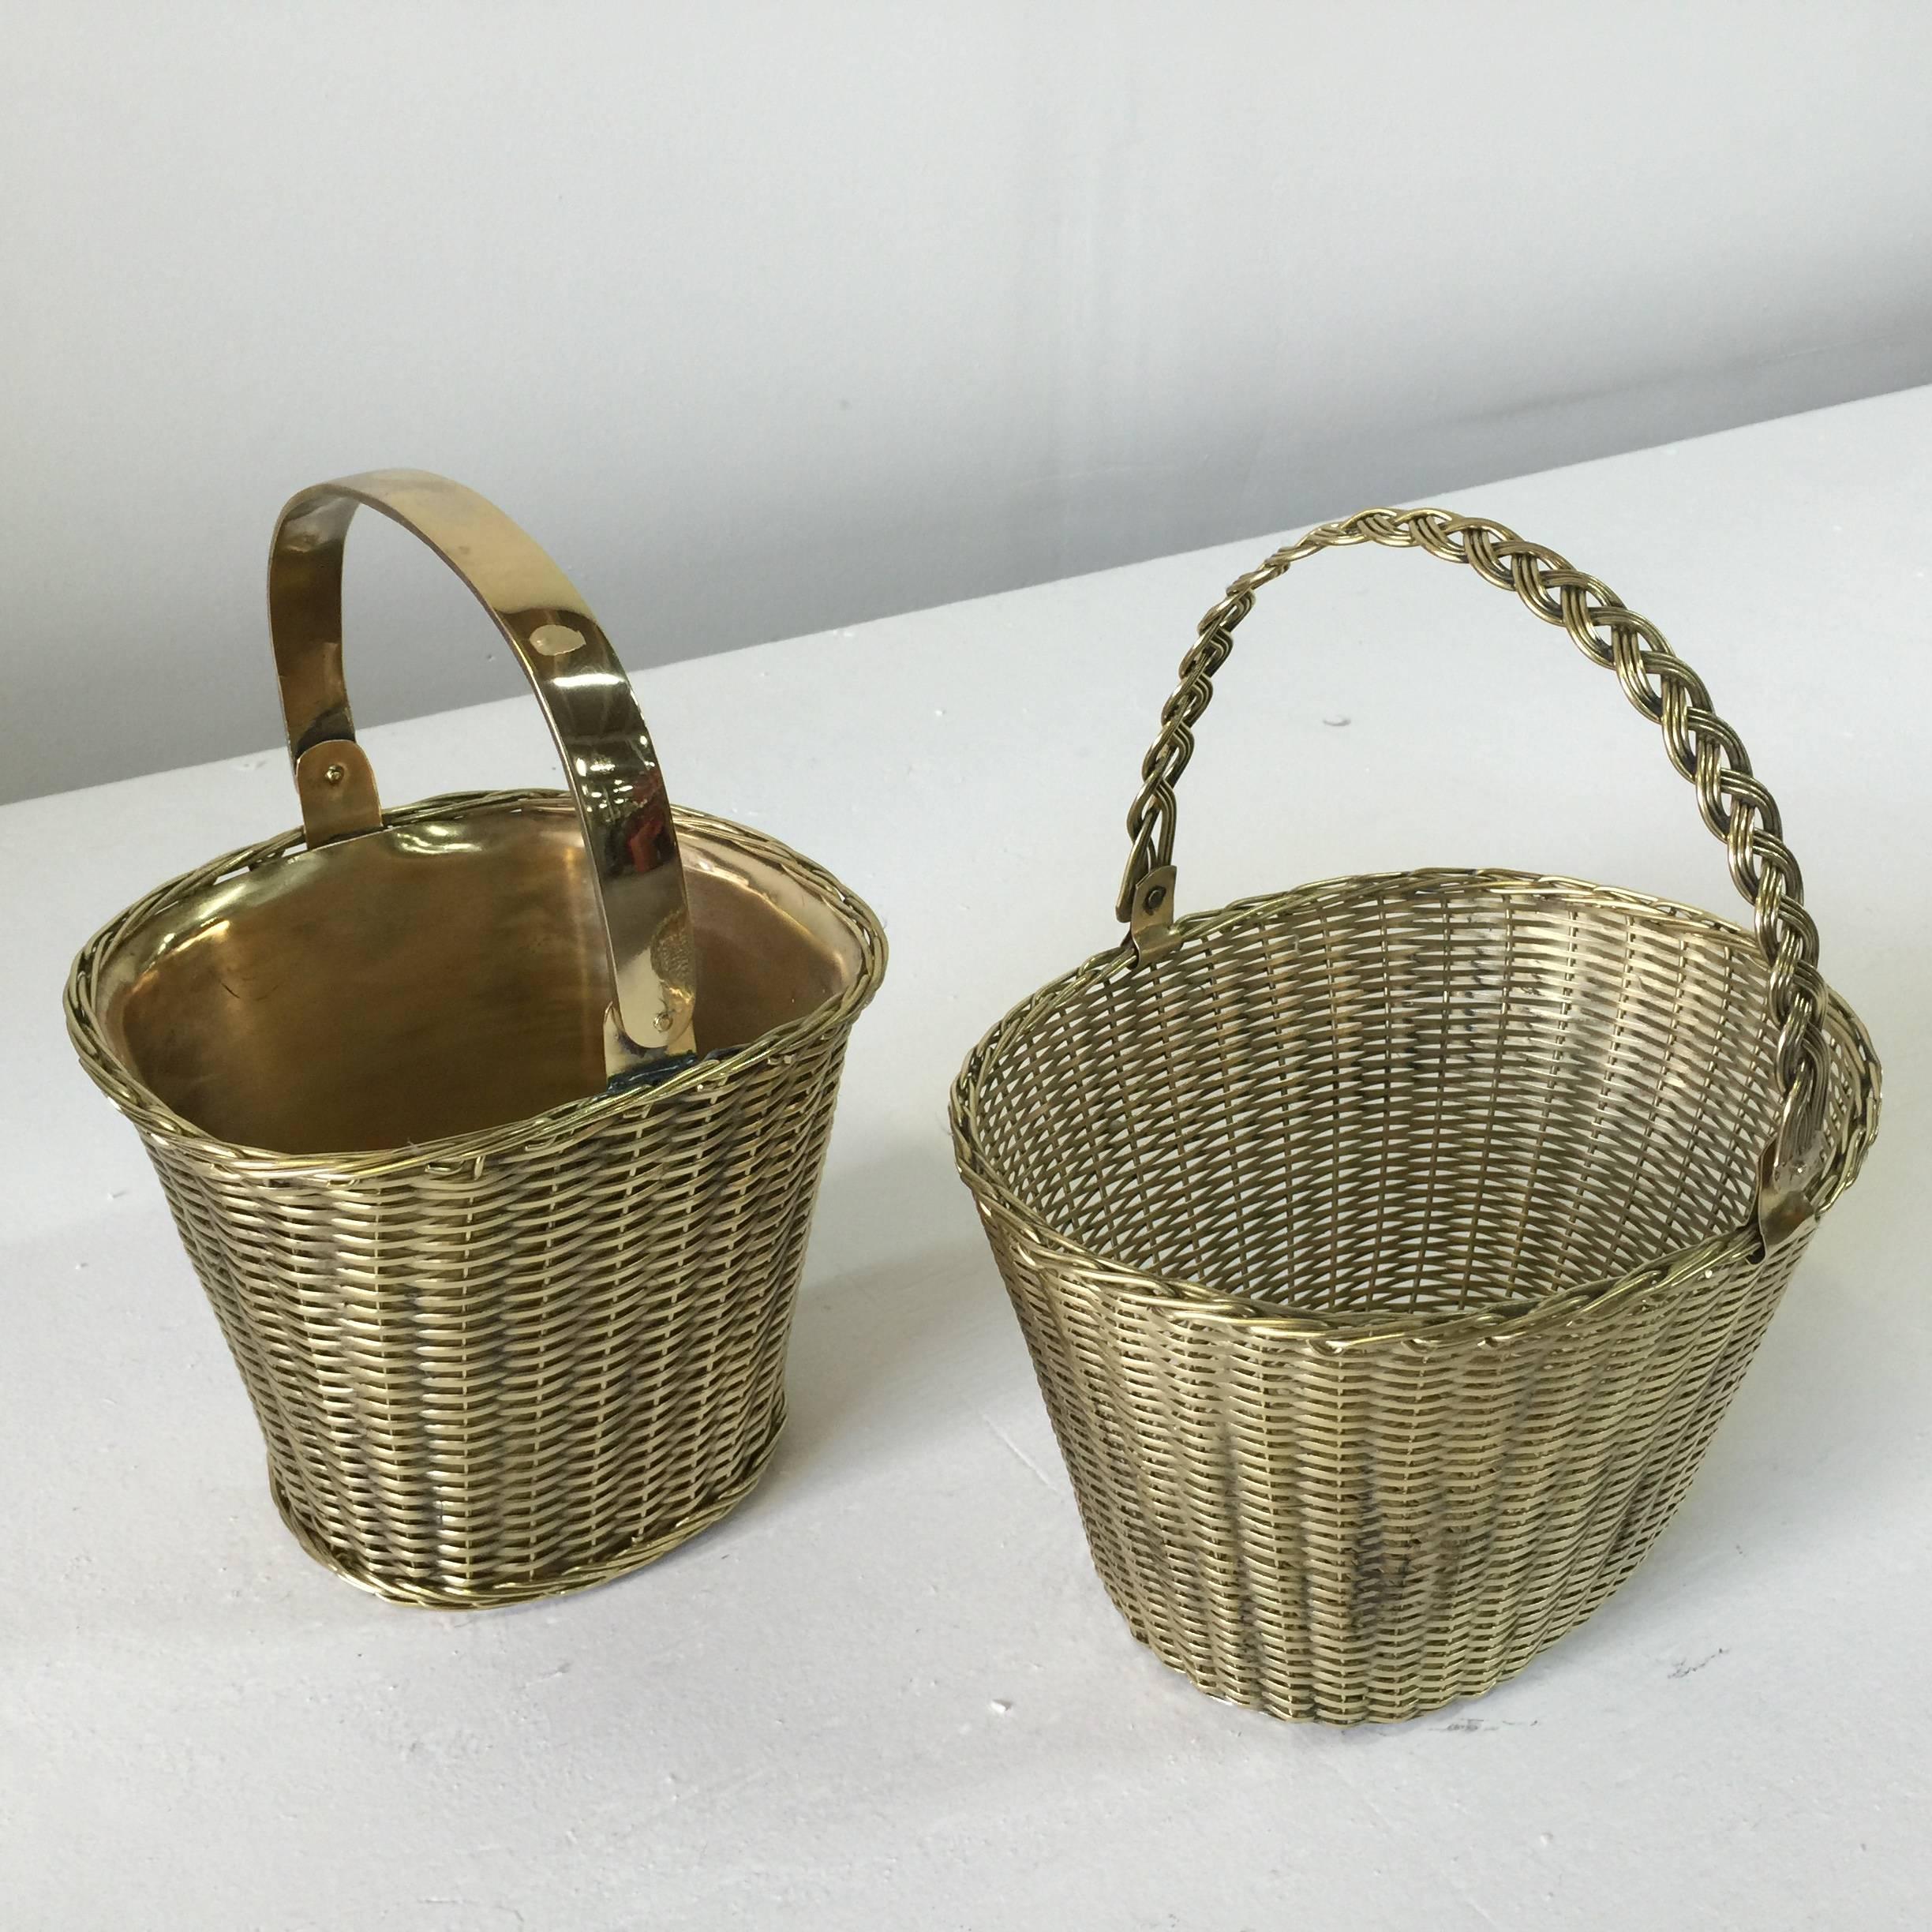 Heavy and well crafted, these woven brass baskets with adjustable handles are great for plants, orchids, fruit, etc.

Dimensions of smaller basket: 12 inches tall, 10 inches wide, 8 inches deep.